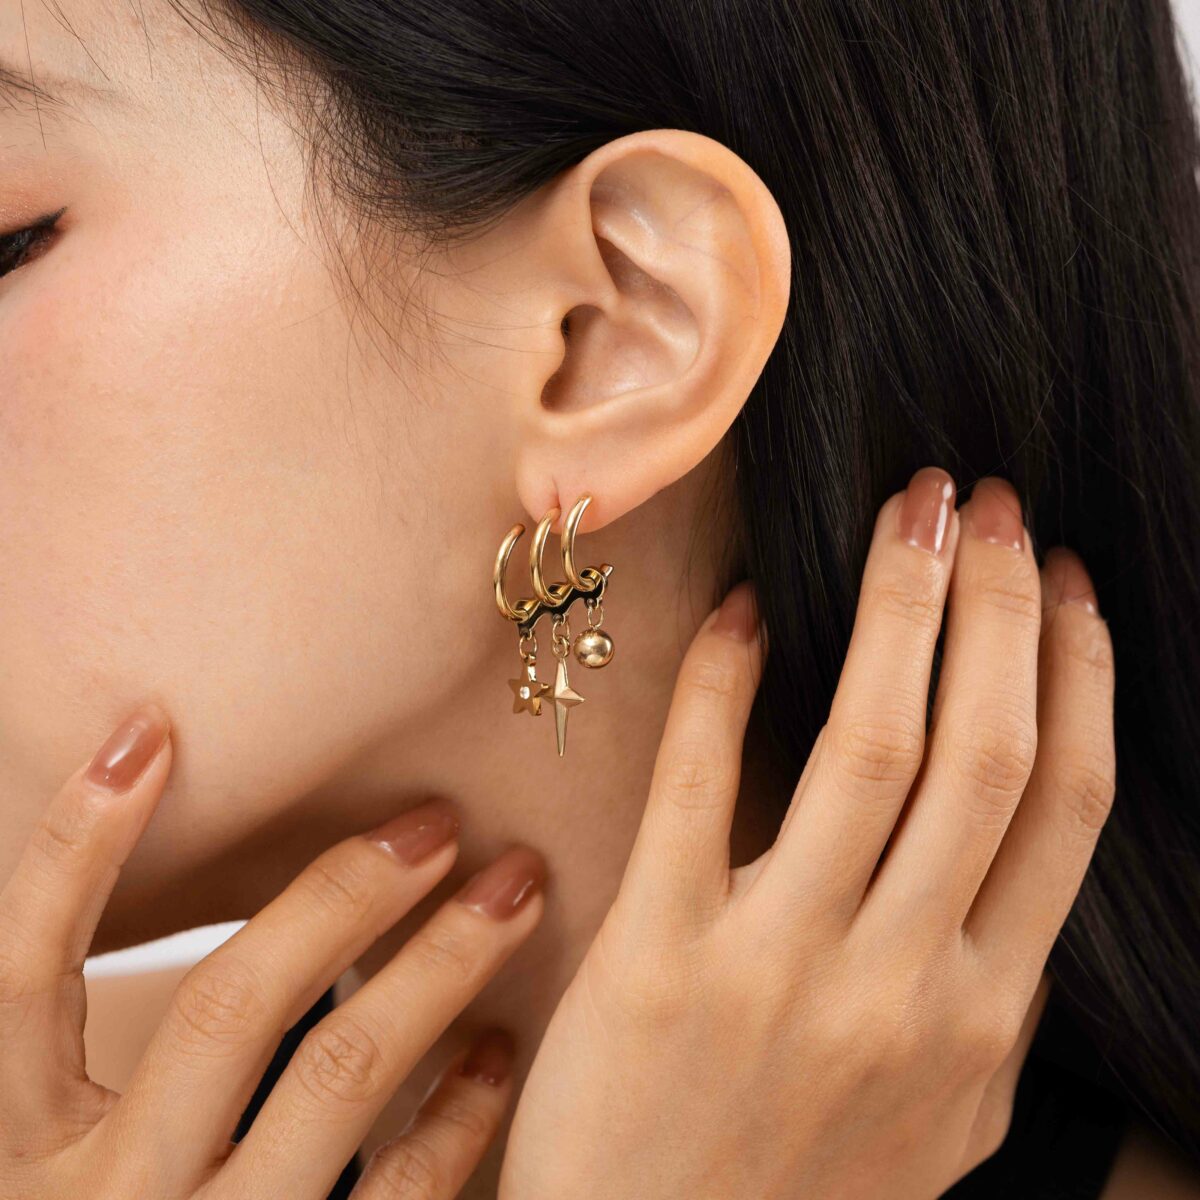 https://m.clubbella.co/product/radial-18k-gold-plated-ear-crawler-earrings/ RADIAL CRAWLER EARRINGS (4)